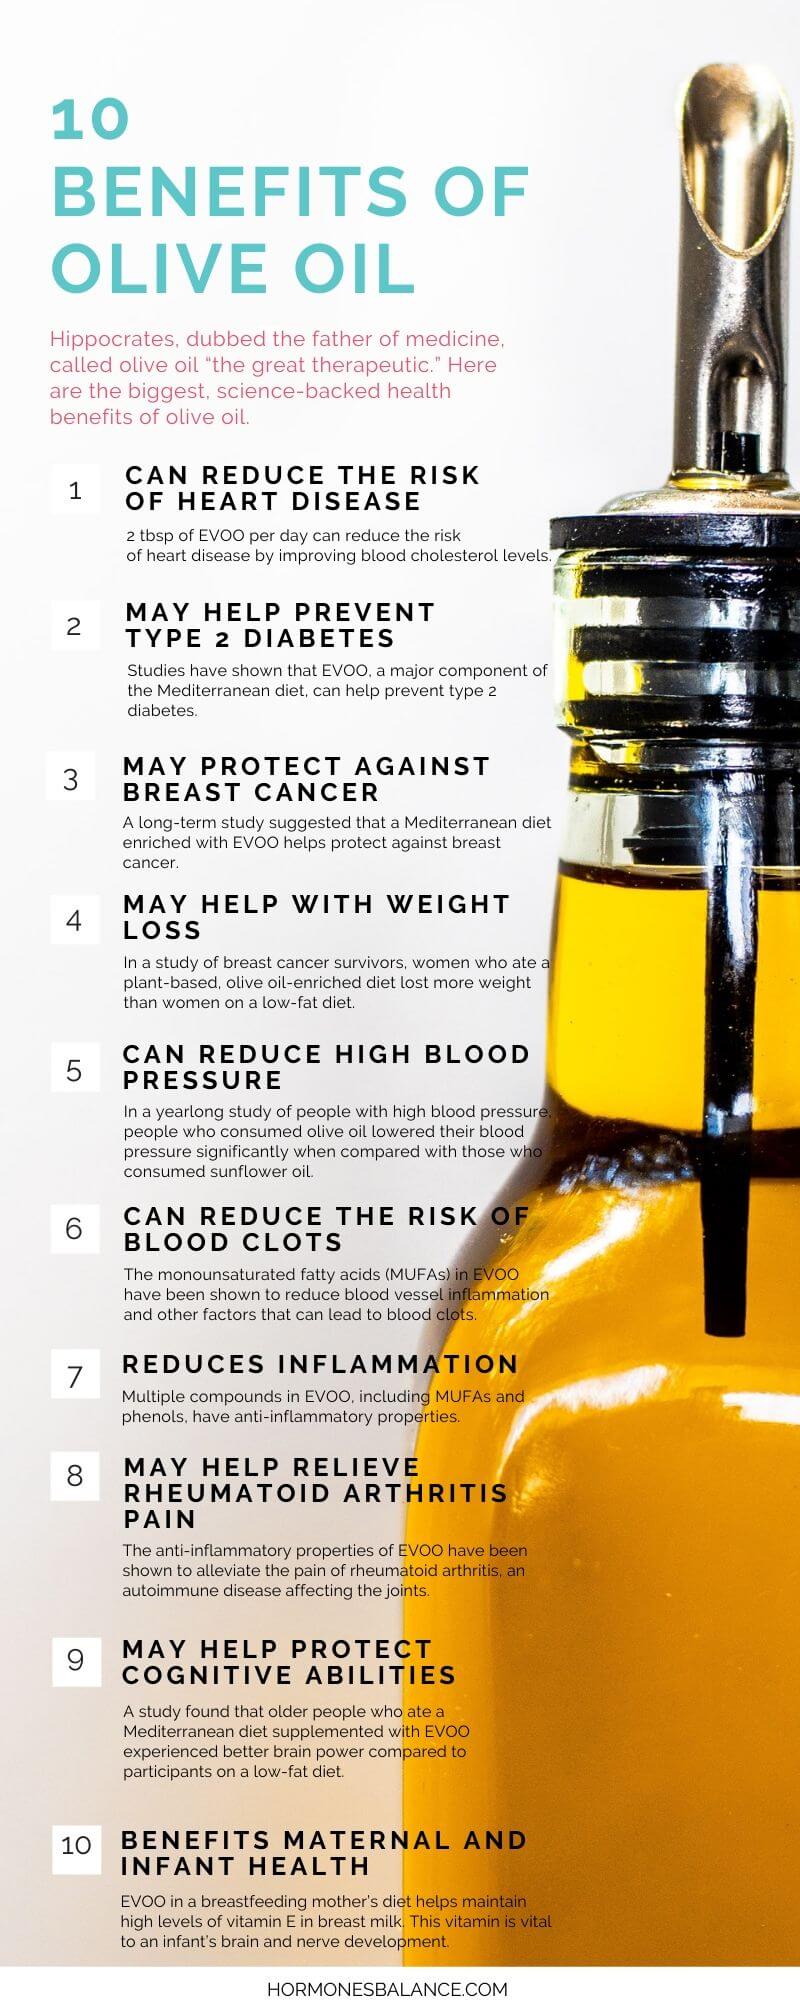 A breakdown of the 10 biggest, evidence-based health benefits of olive oil. 